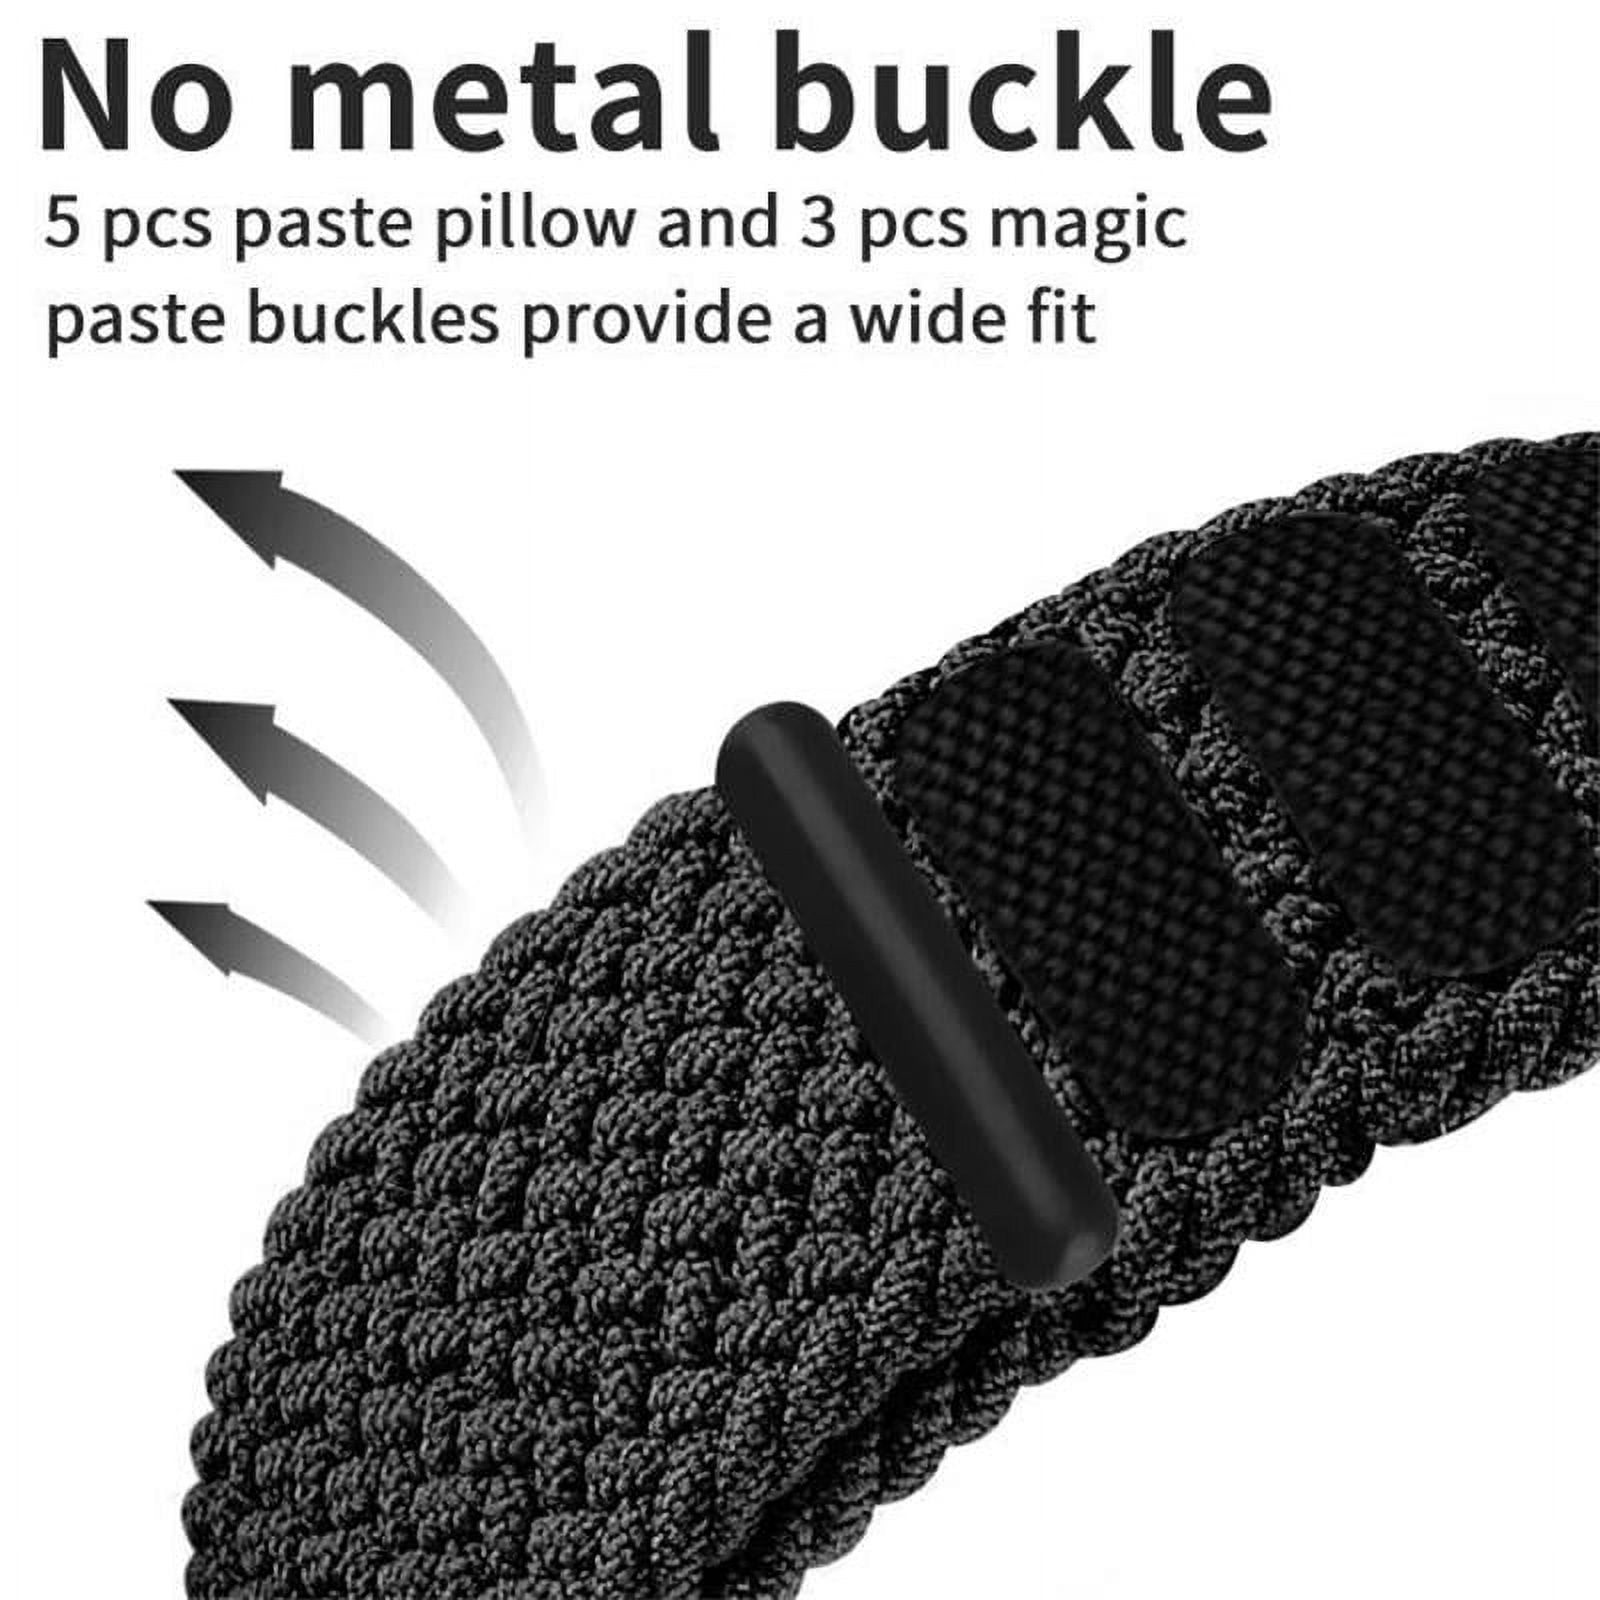 Colossal replacement belt straps for 45mm close end buckle – AQUILA®